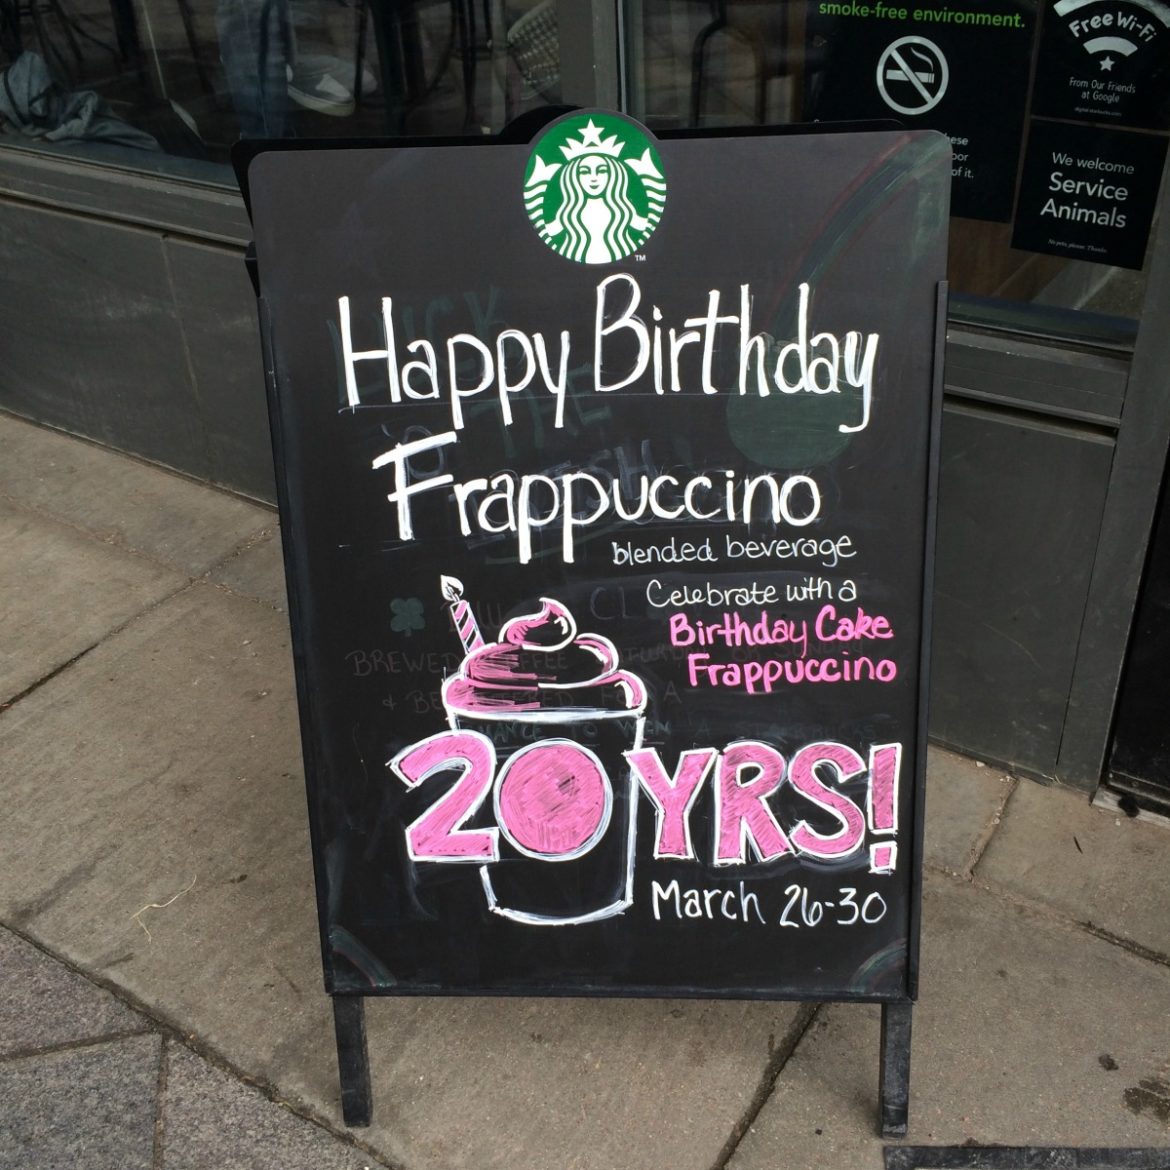 Celebrate the Frappuccino’s 20th: Try the Birthday Day Cake Frappuccino March 26th – March 30th.